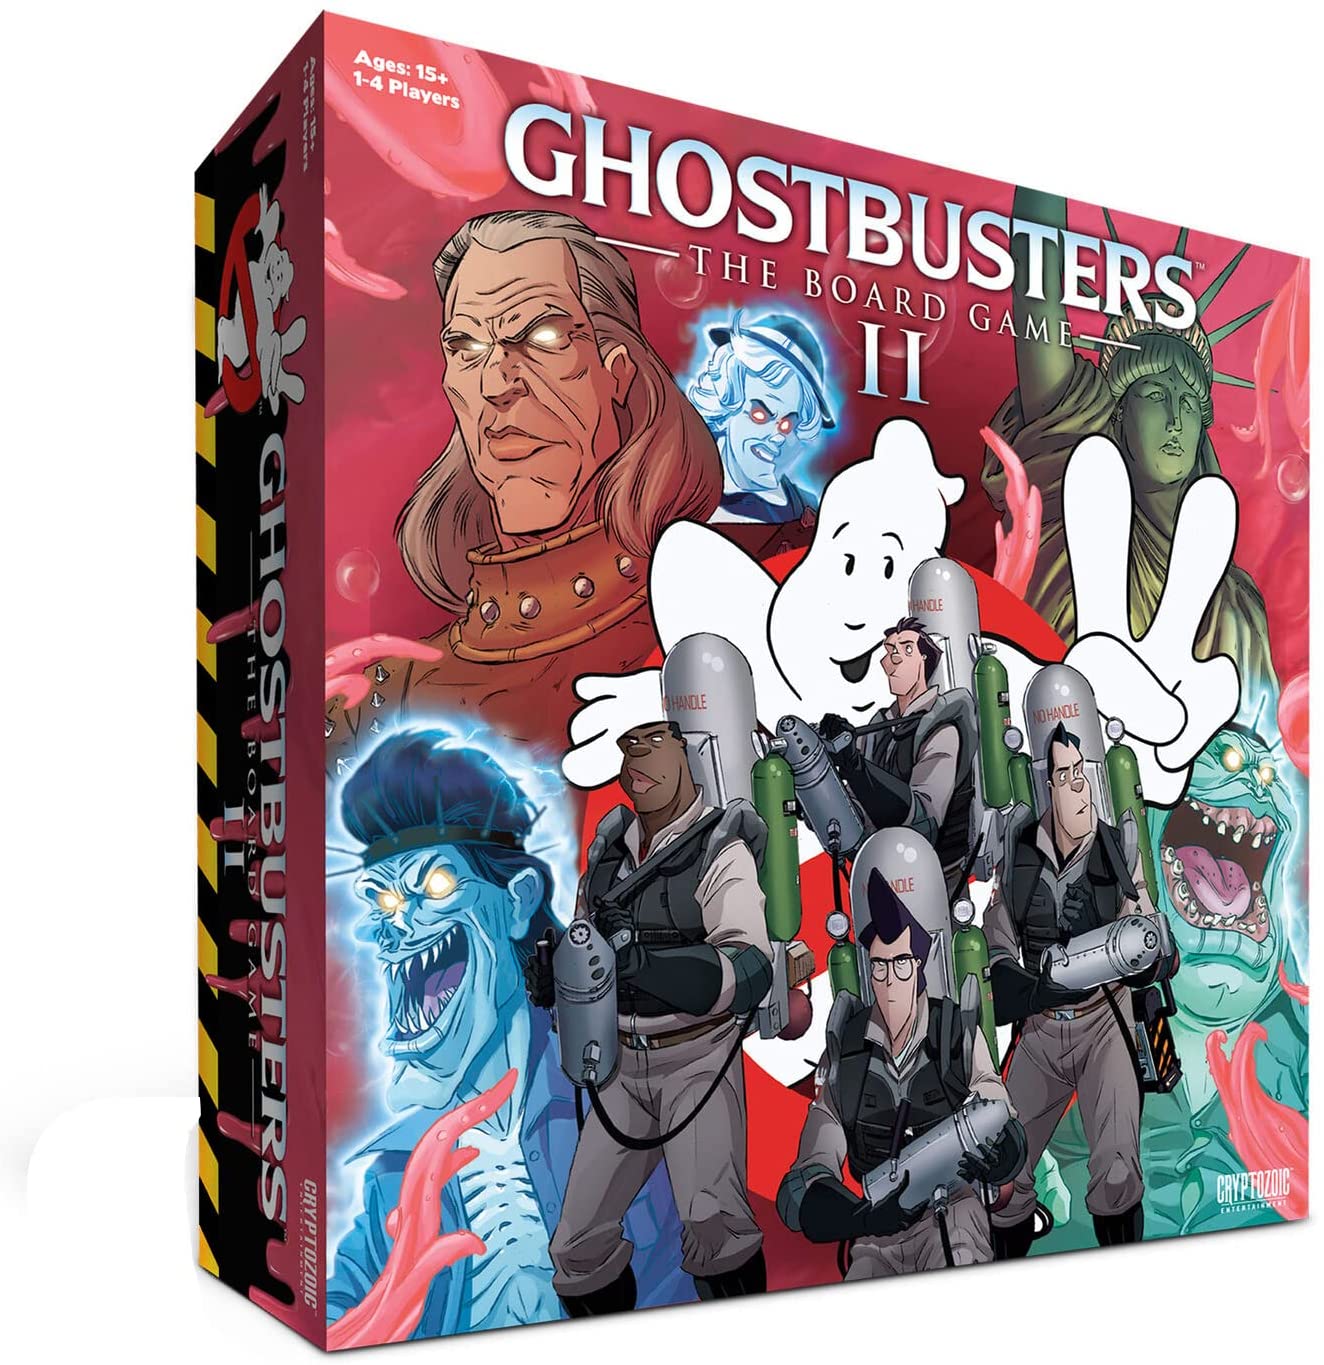 Ghostbusters 2: The Board Game [DAMAGED] 